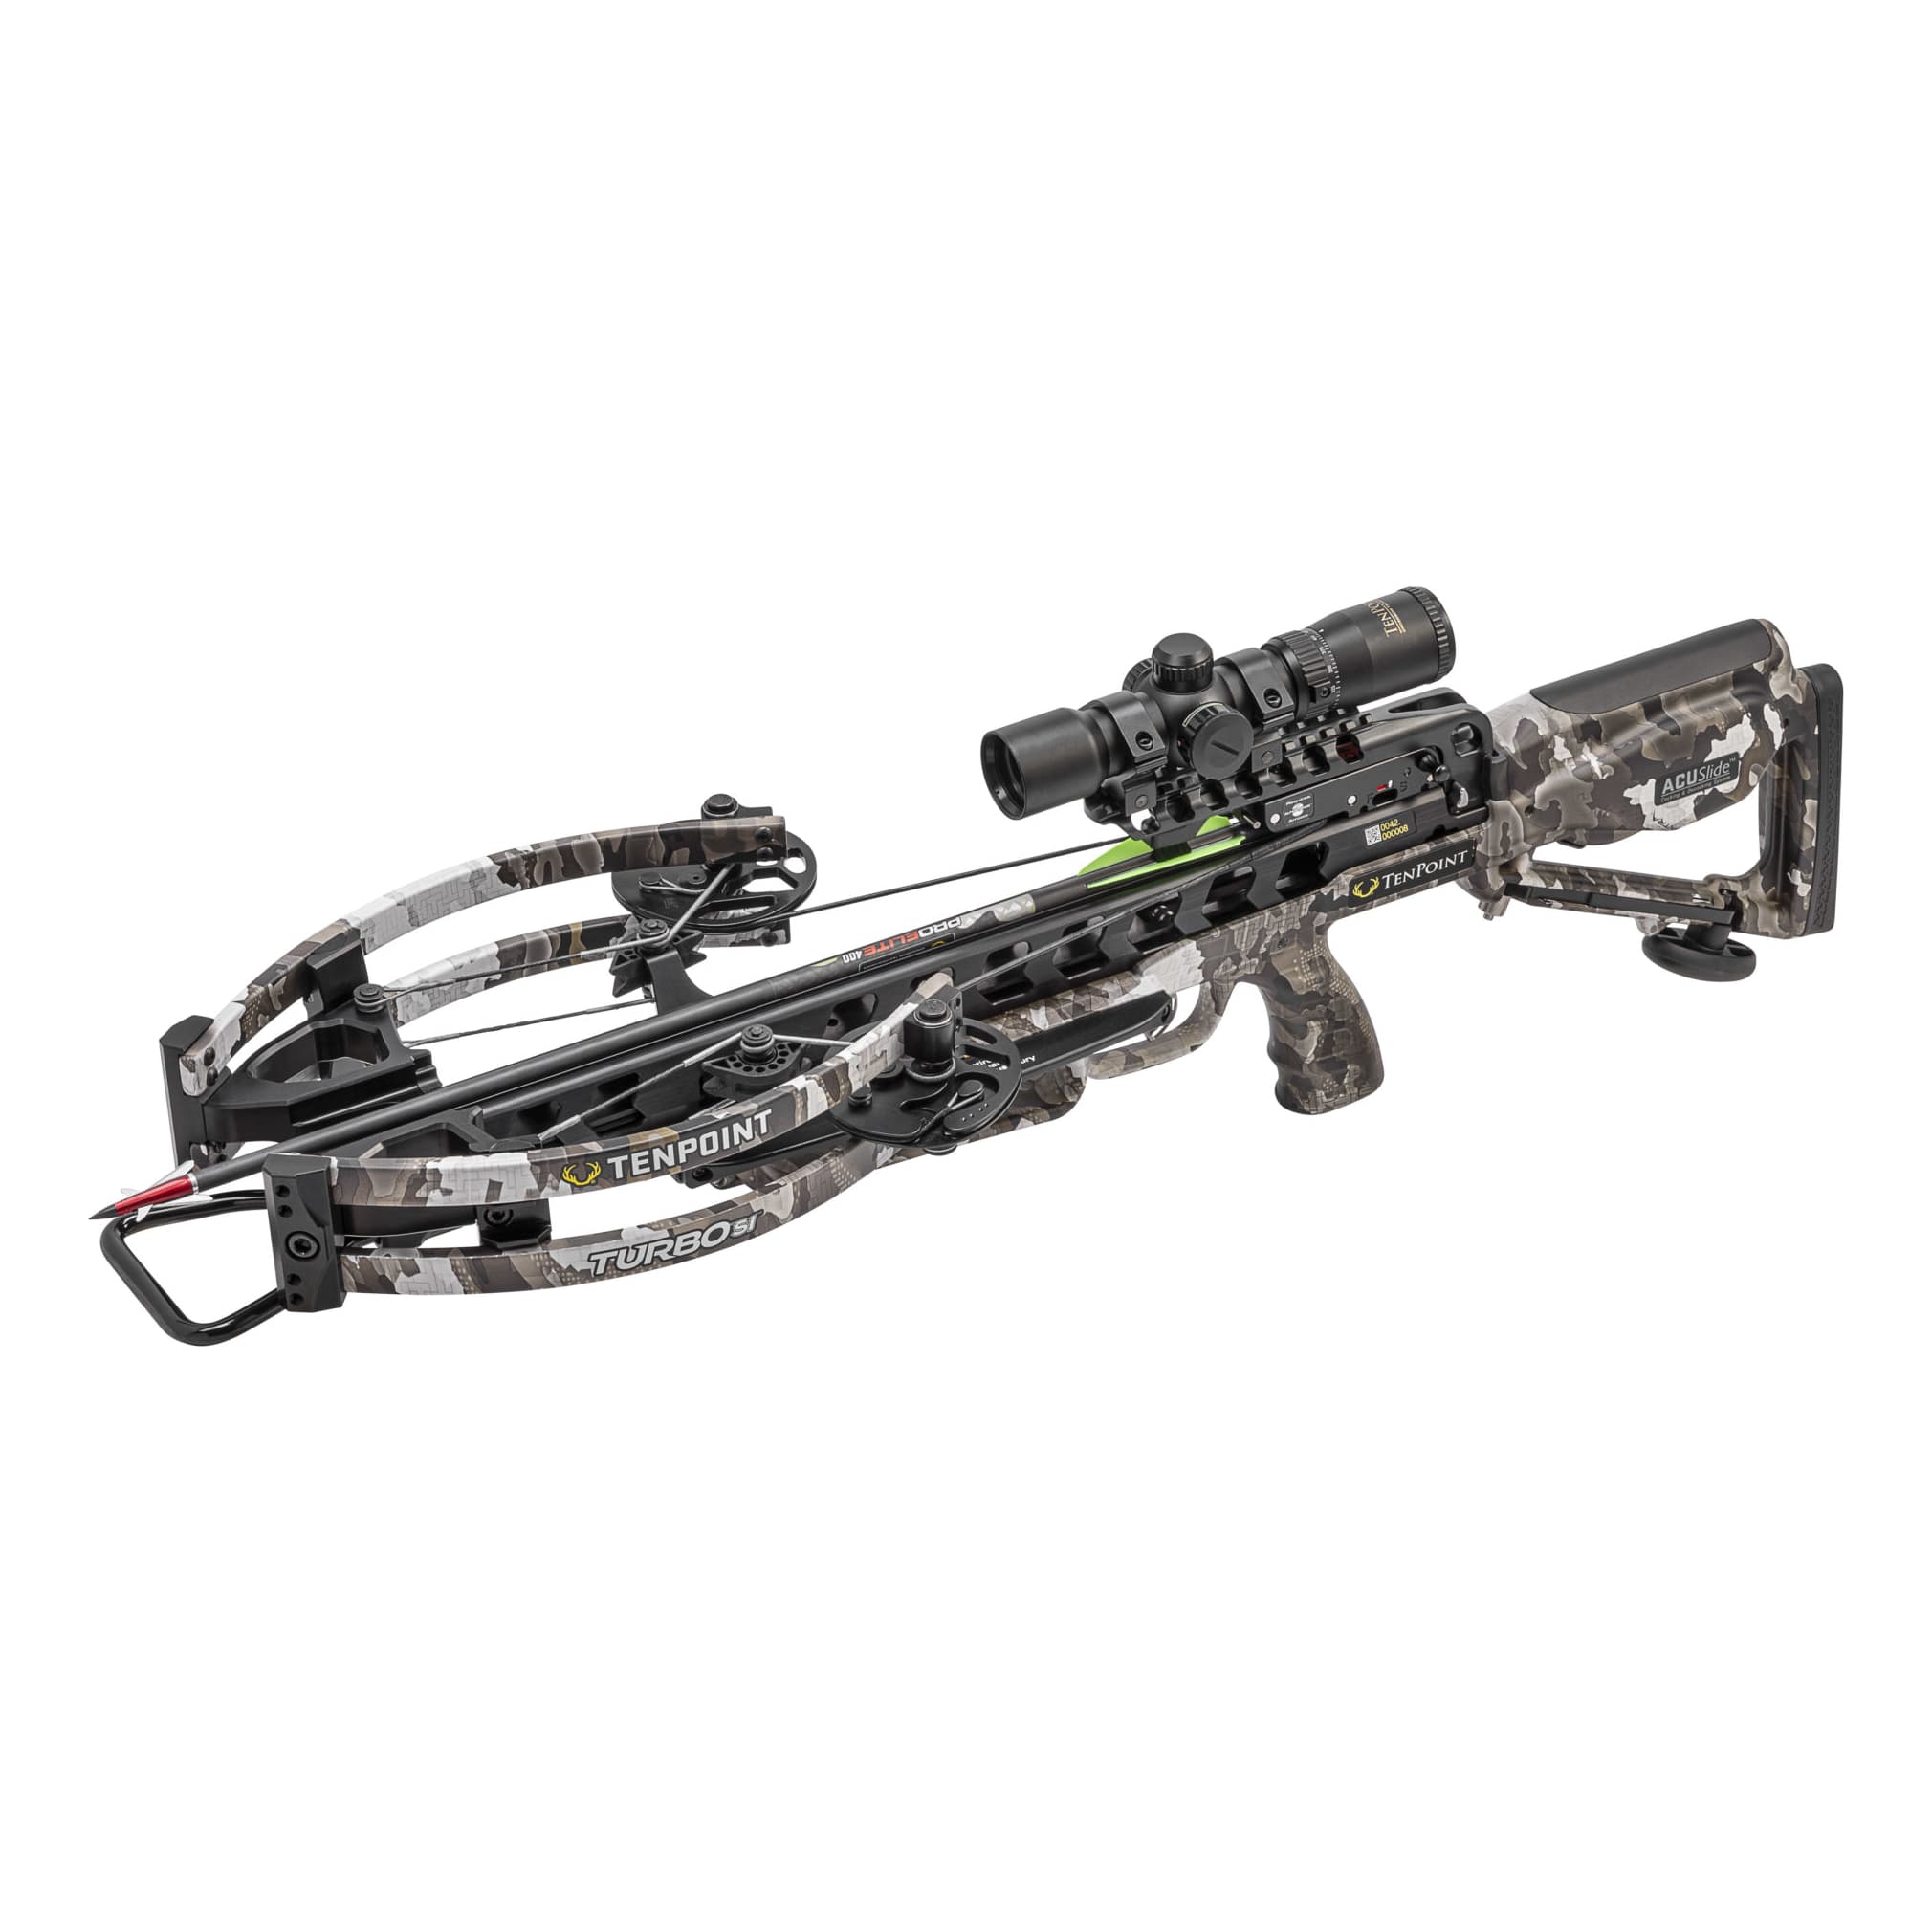 CenterPoint® Amped™ 425 Compound Crossbow with Silent Crank Cocking Device